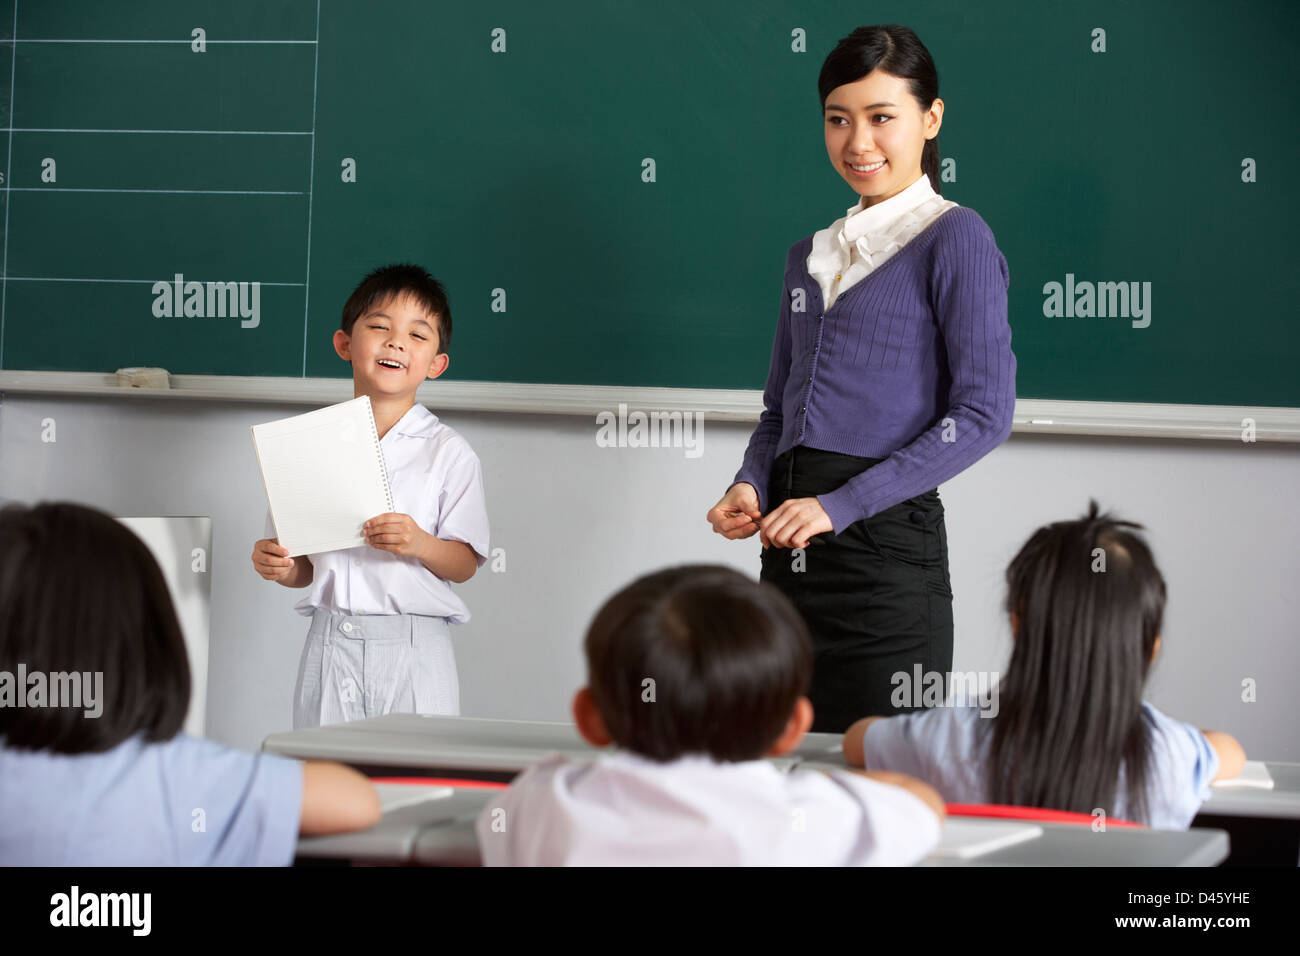 Pupil And Teacher Standing By Blackboard In Chinese School Classroom Stock Photo